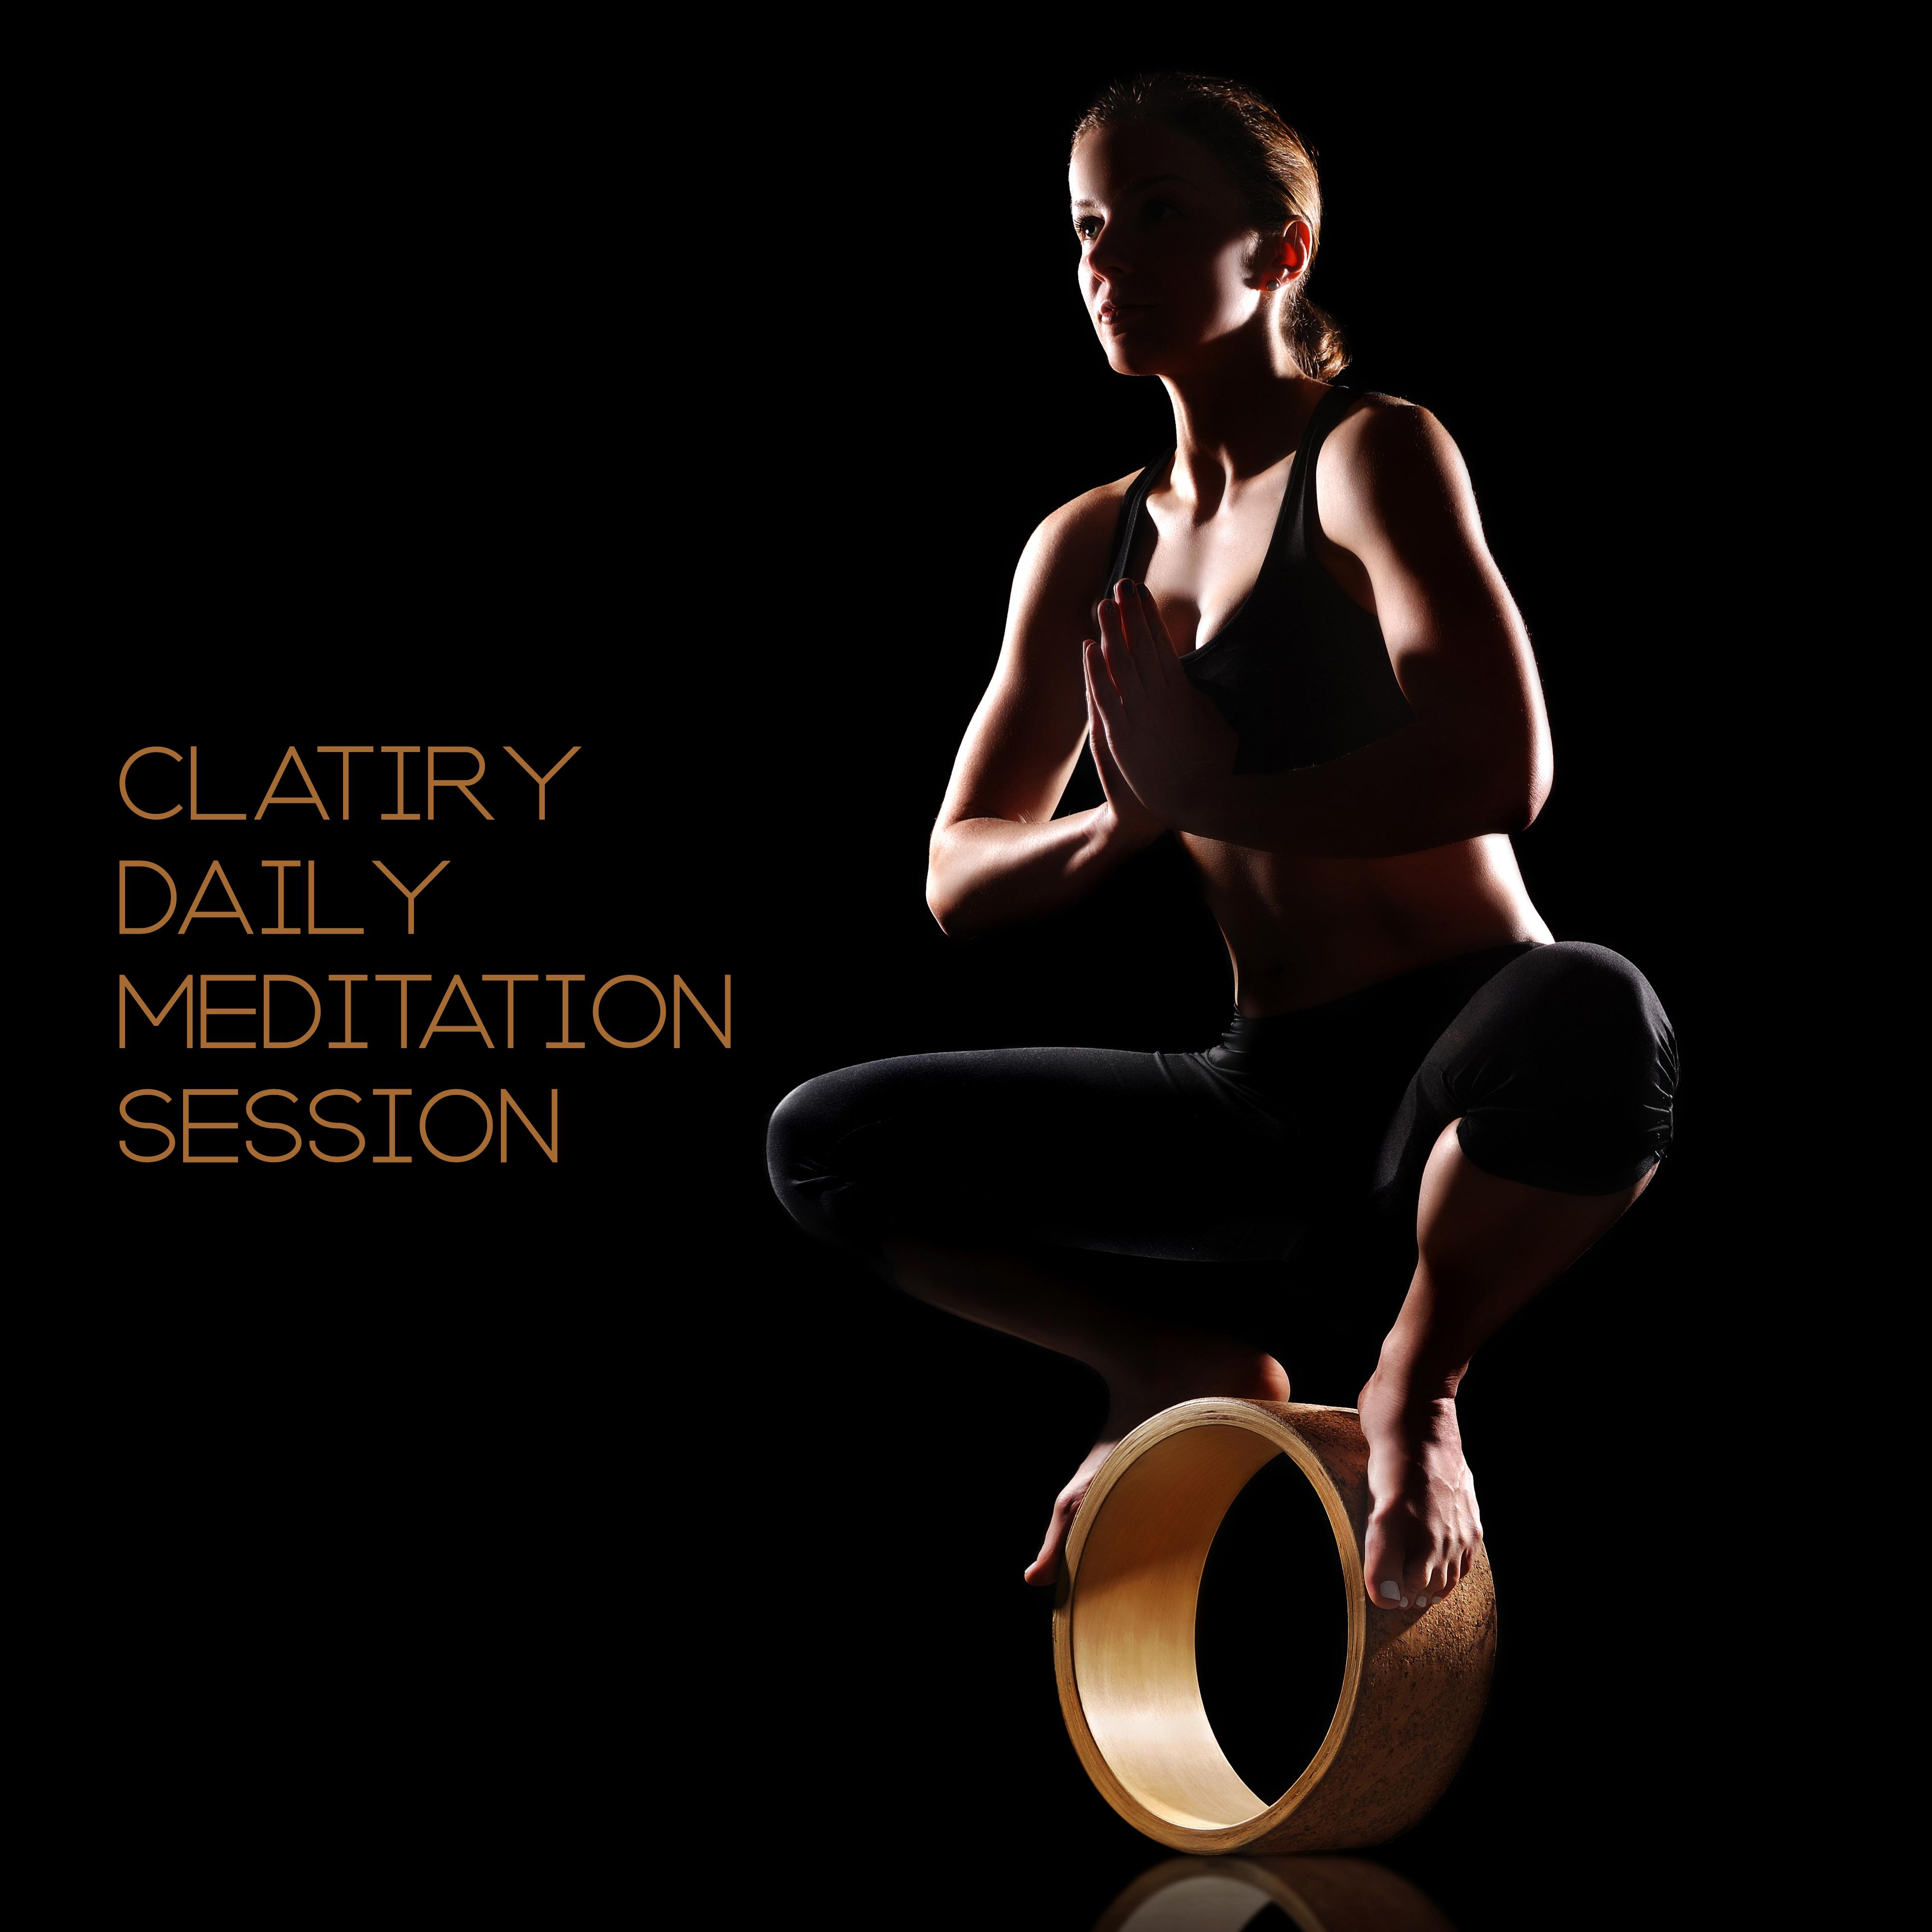 Clatiry Daily Meditation Session: 2019 New Age Ambient Deep Music for Yoga Training & Inner Relaxation